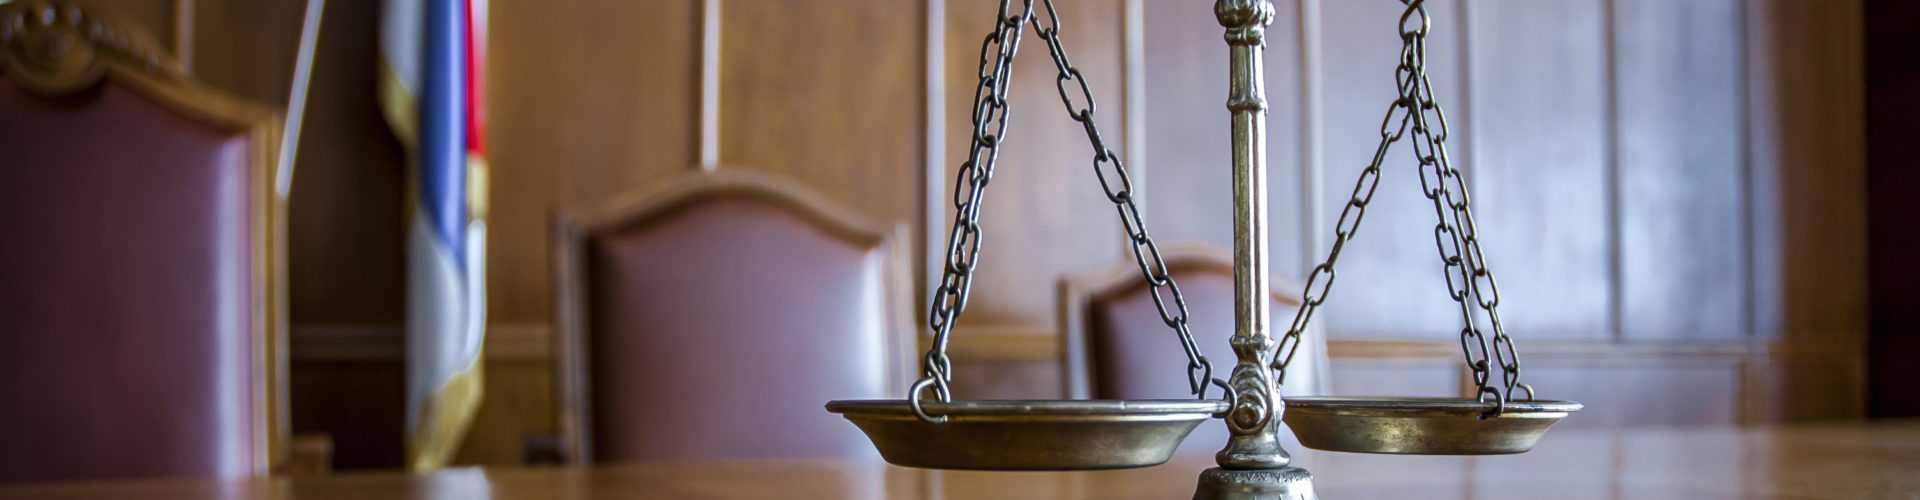 Scales of justice on a table in a courtroom